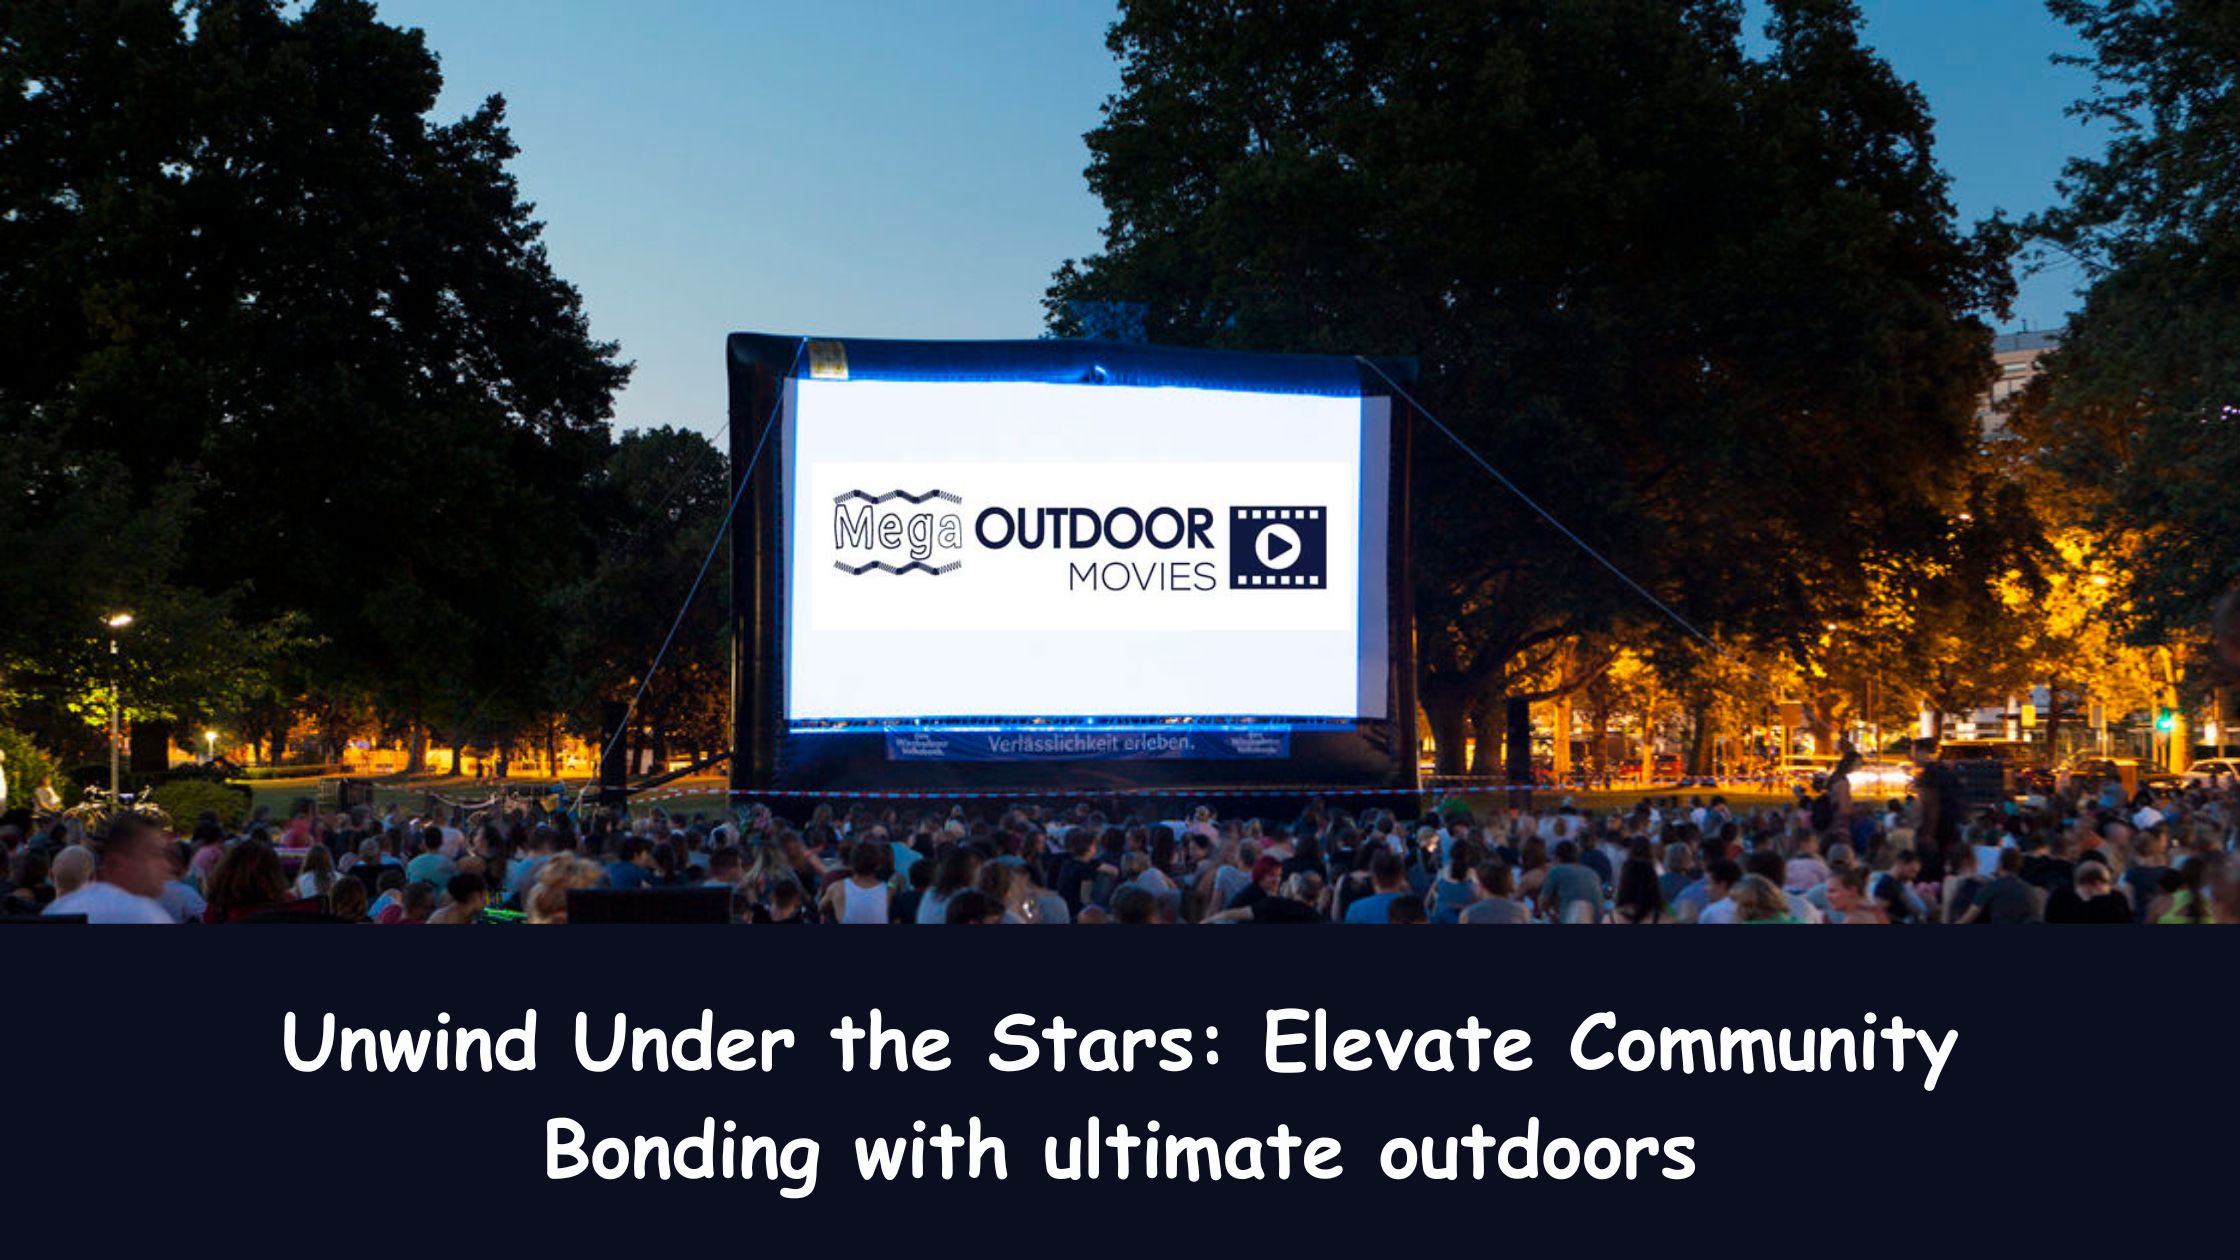 Unwind Under the Stars: Elevate Community Bonding with ultimate outdoors